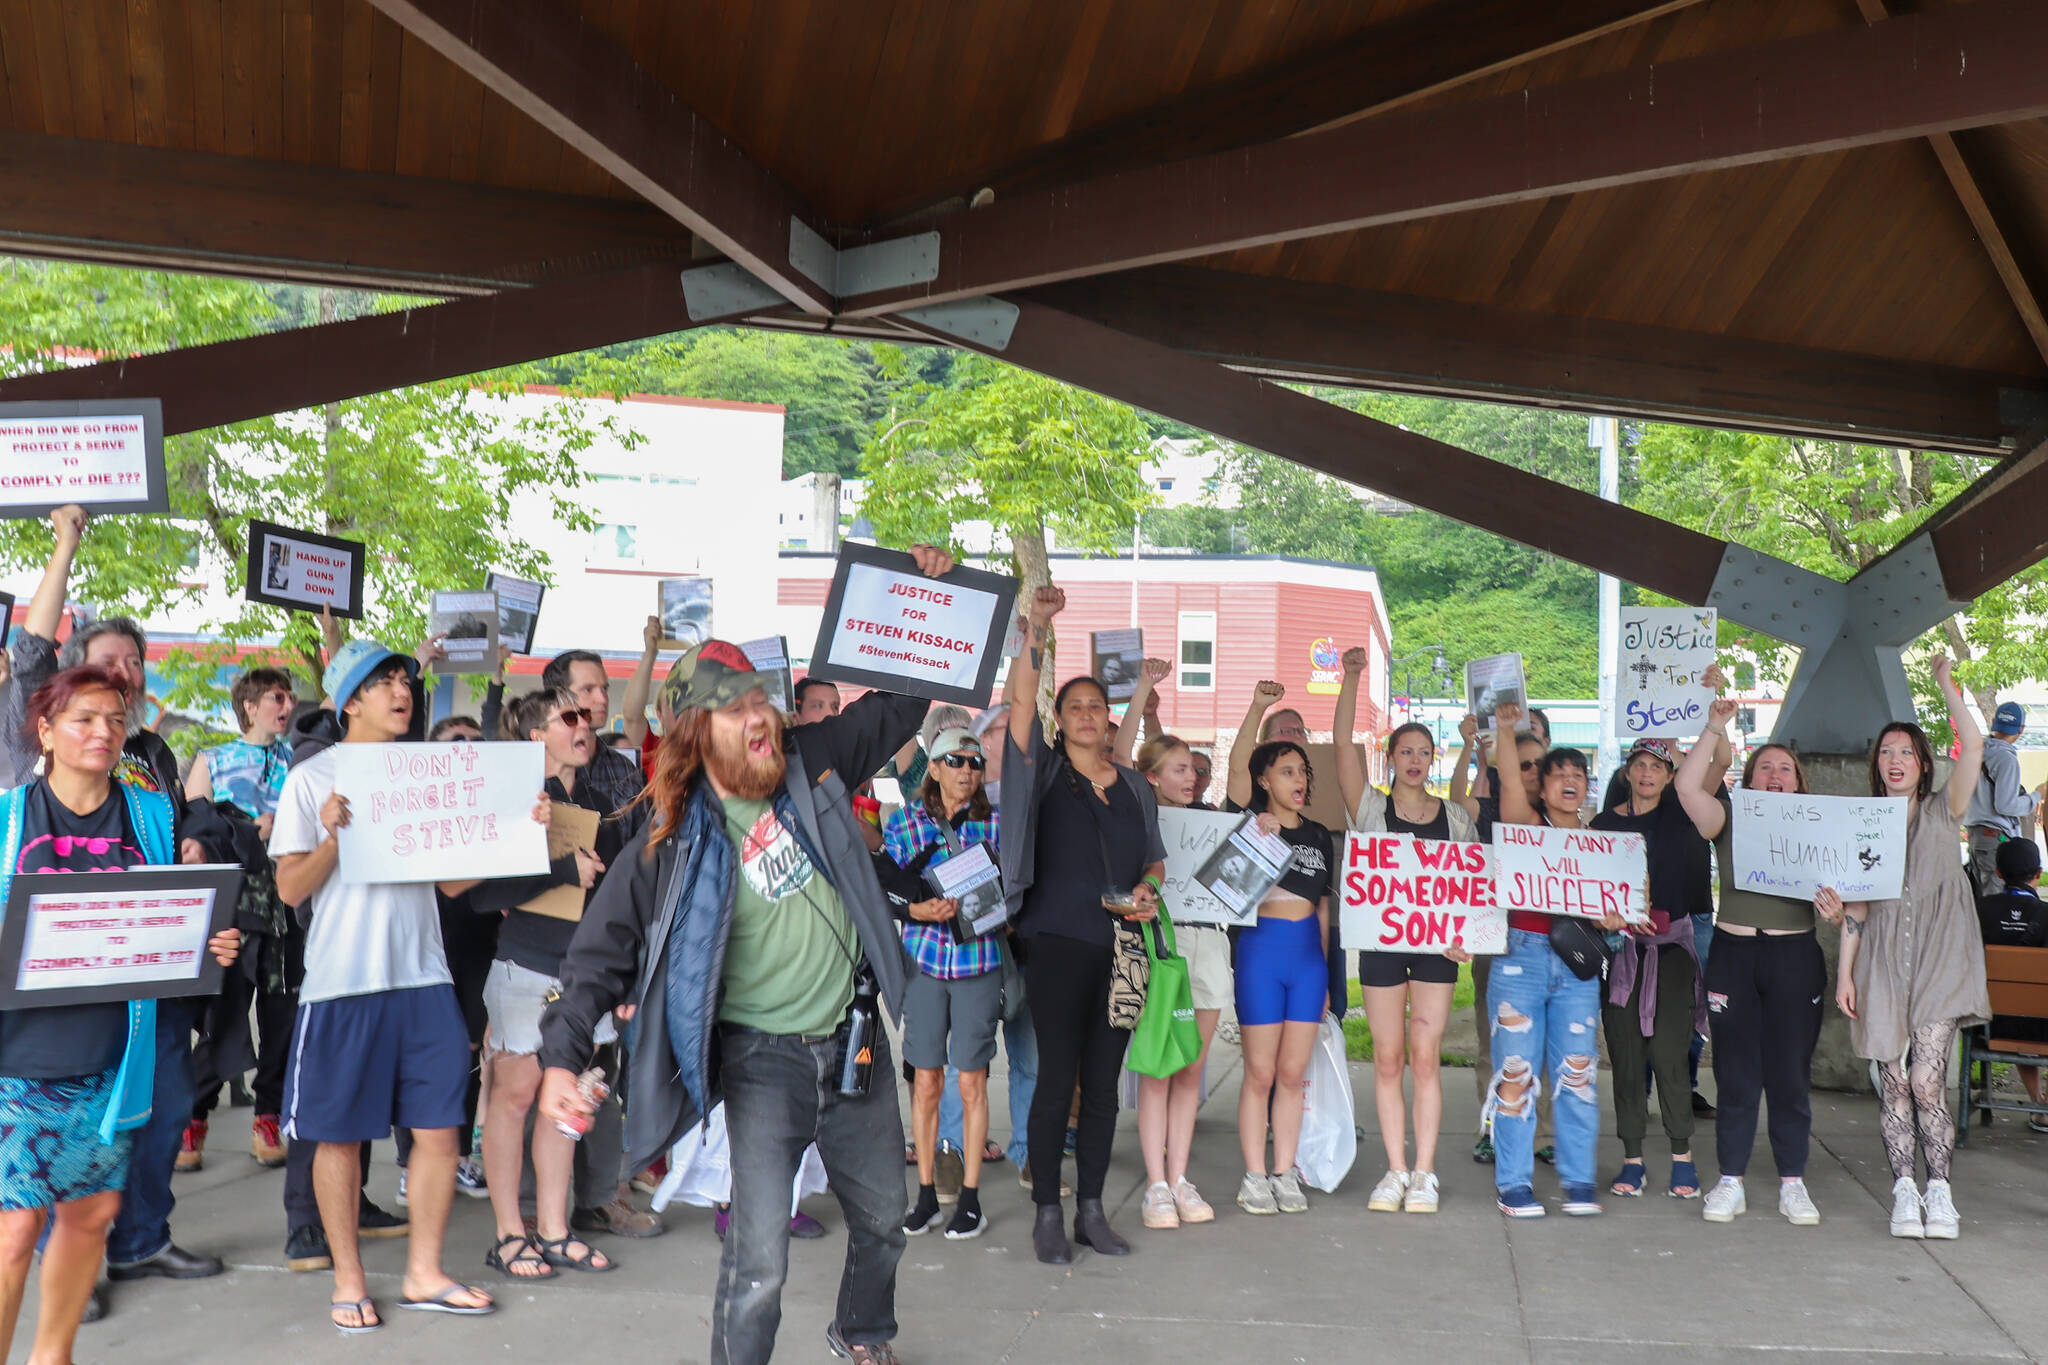 People protesting the death of Steven Kissack gather at Marine Park after marching through downtown Juneau on Sunday afternoon. (Jasz Garrett / Juneau Empire)